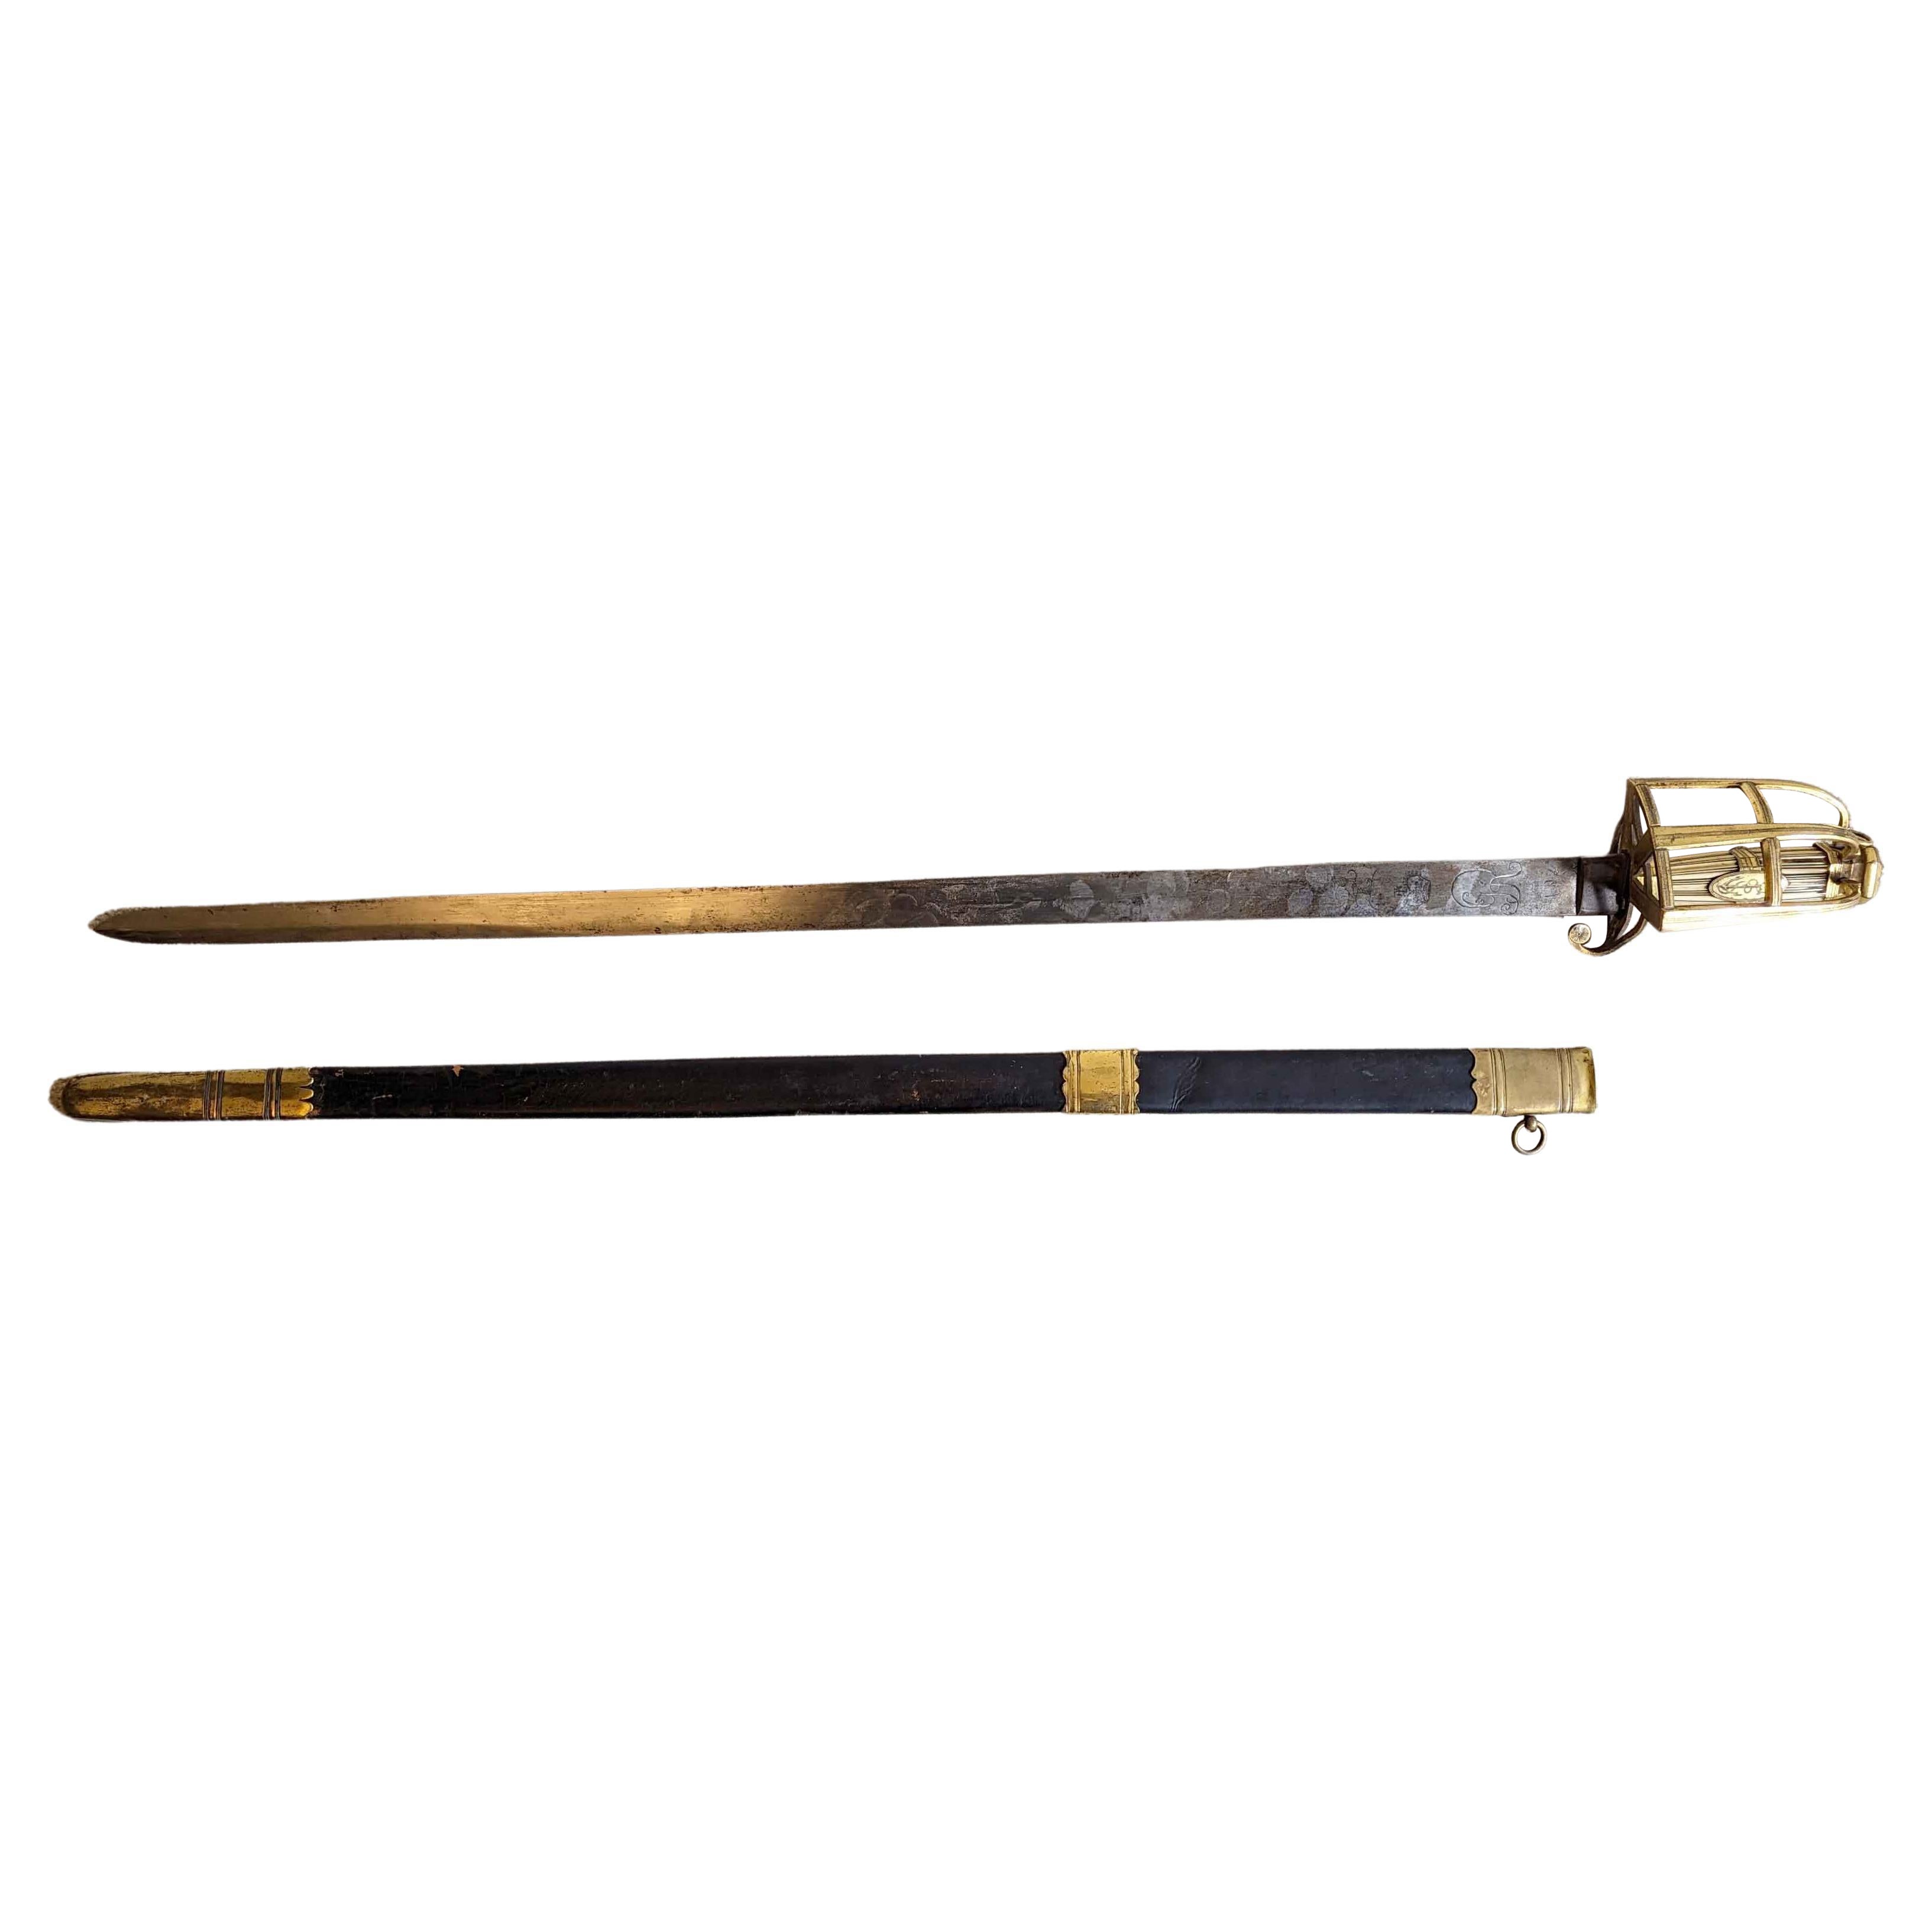 A Lord Nelson Naval Officers Sword with Scabbard & Ivory Grip